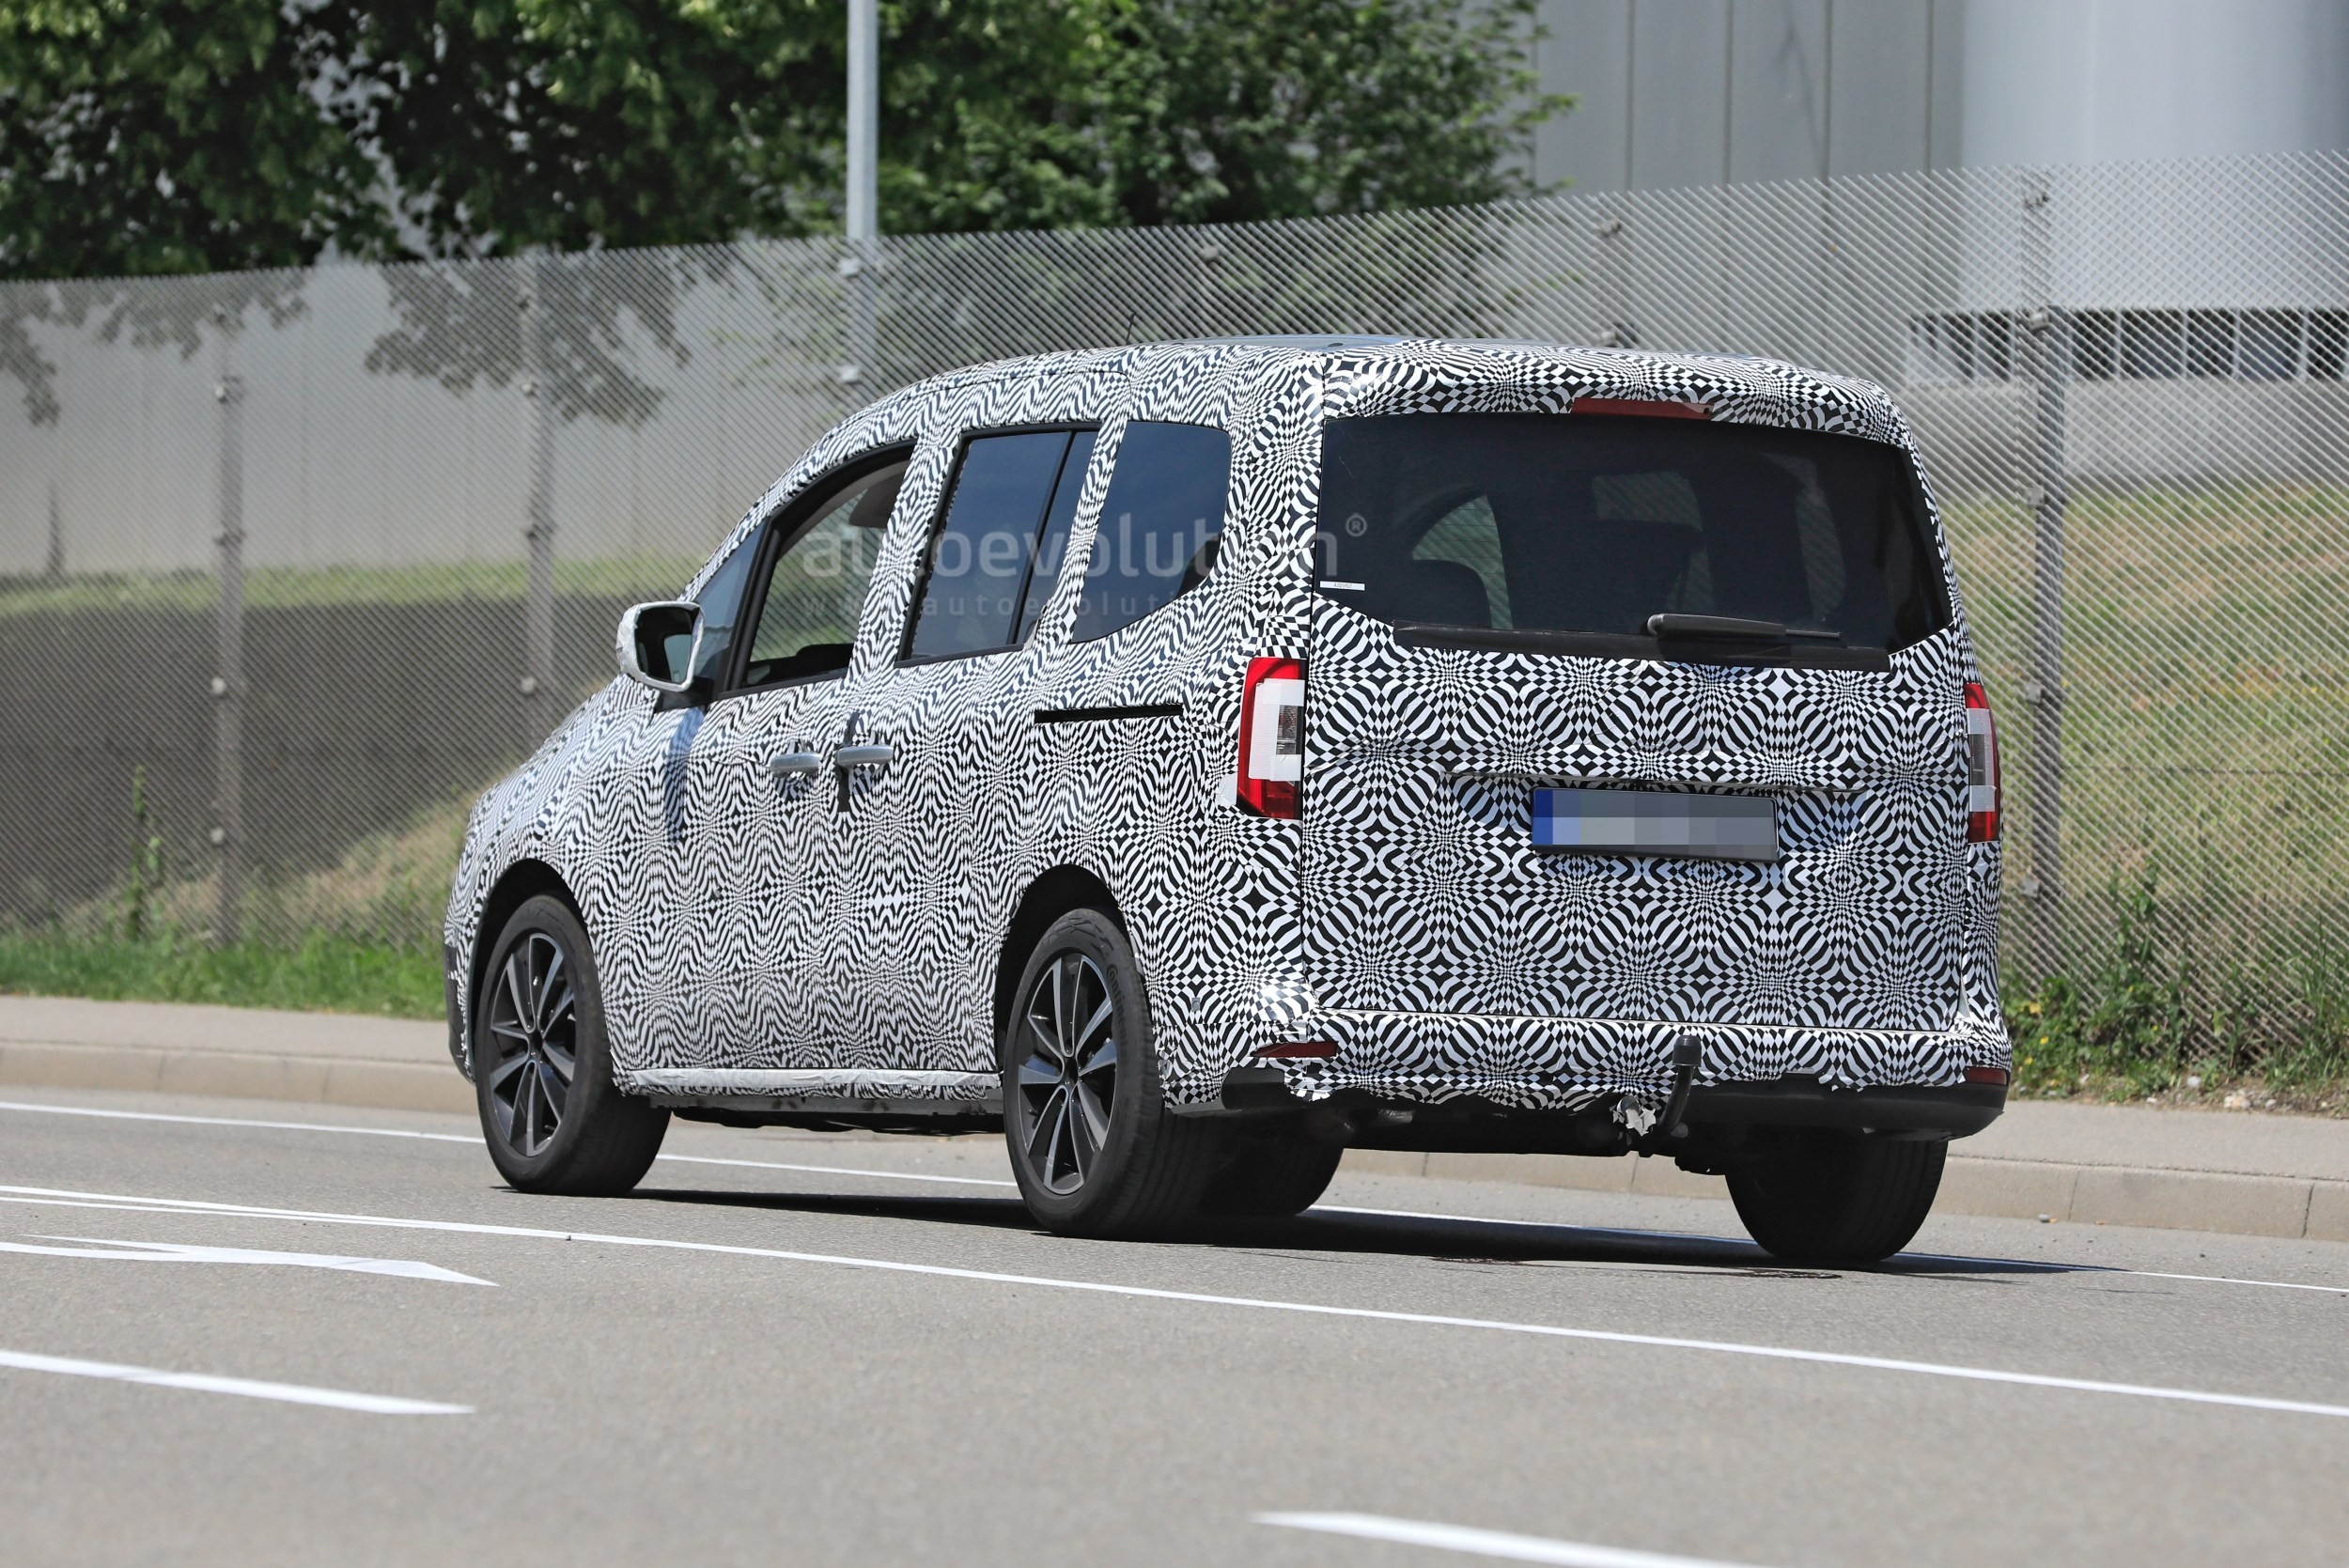 Mercedes Citan small van debuts, to get electric sibling with 285